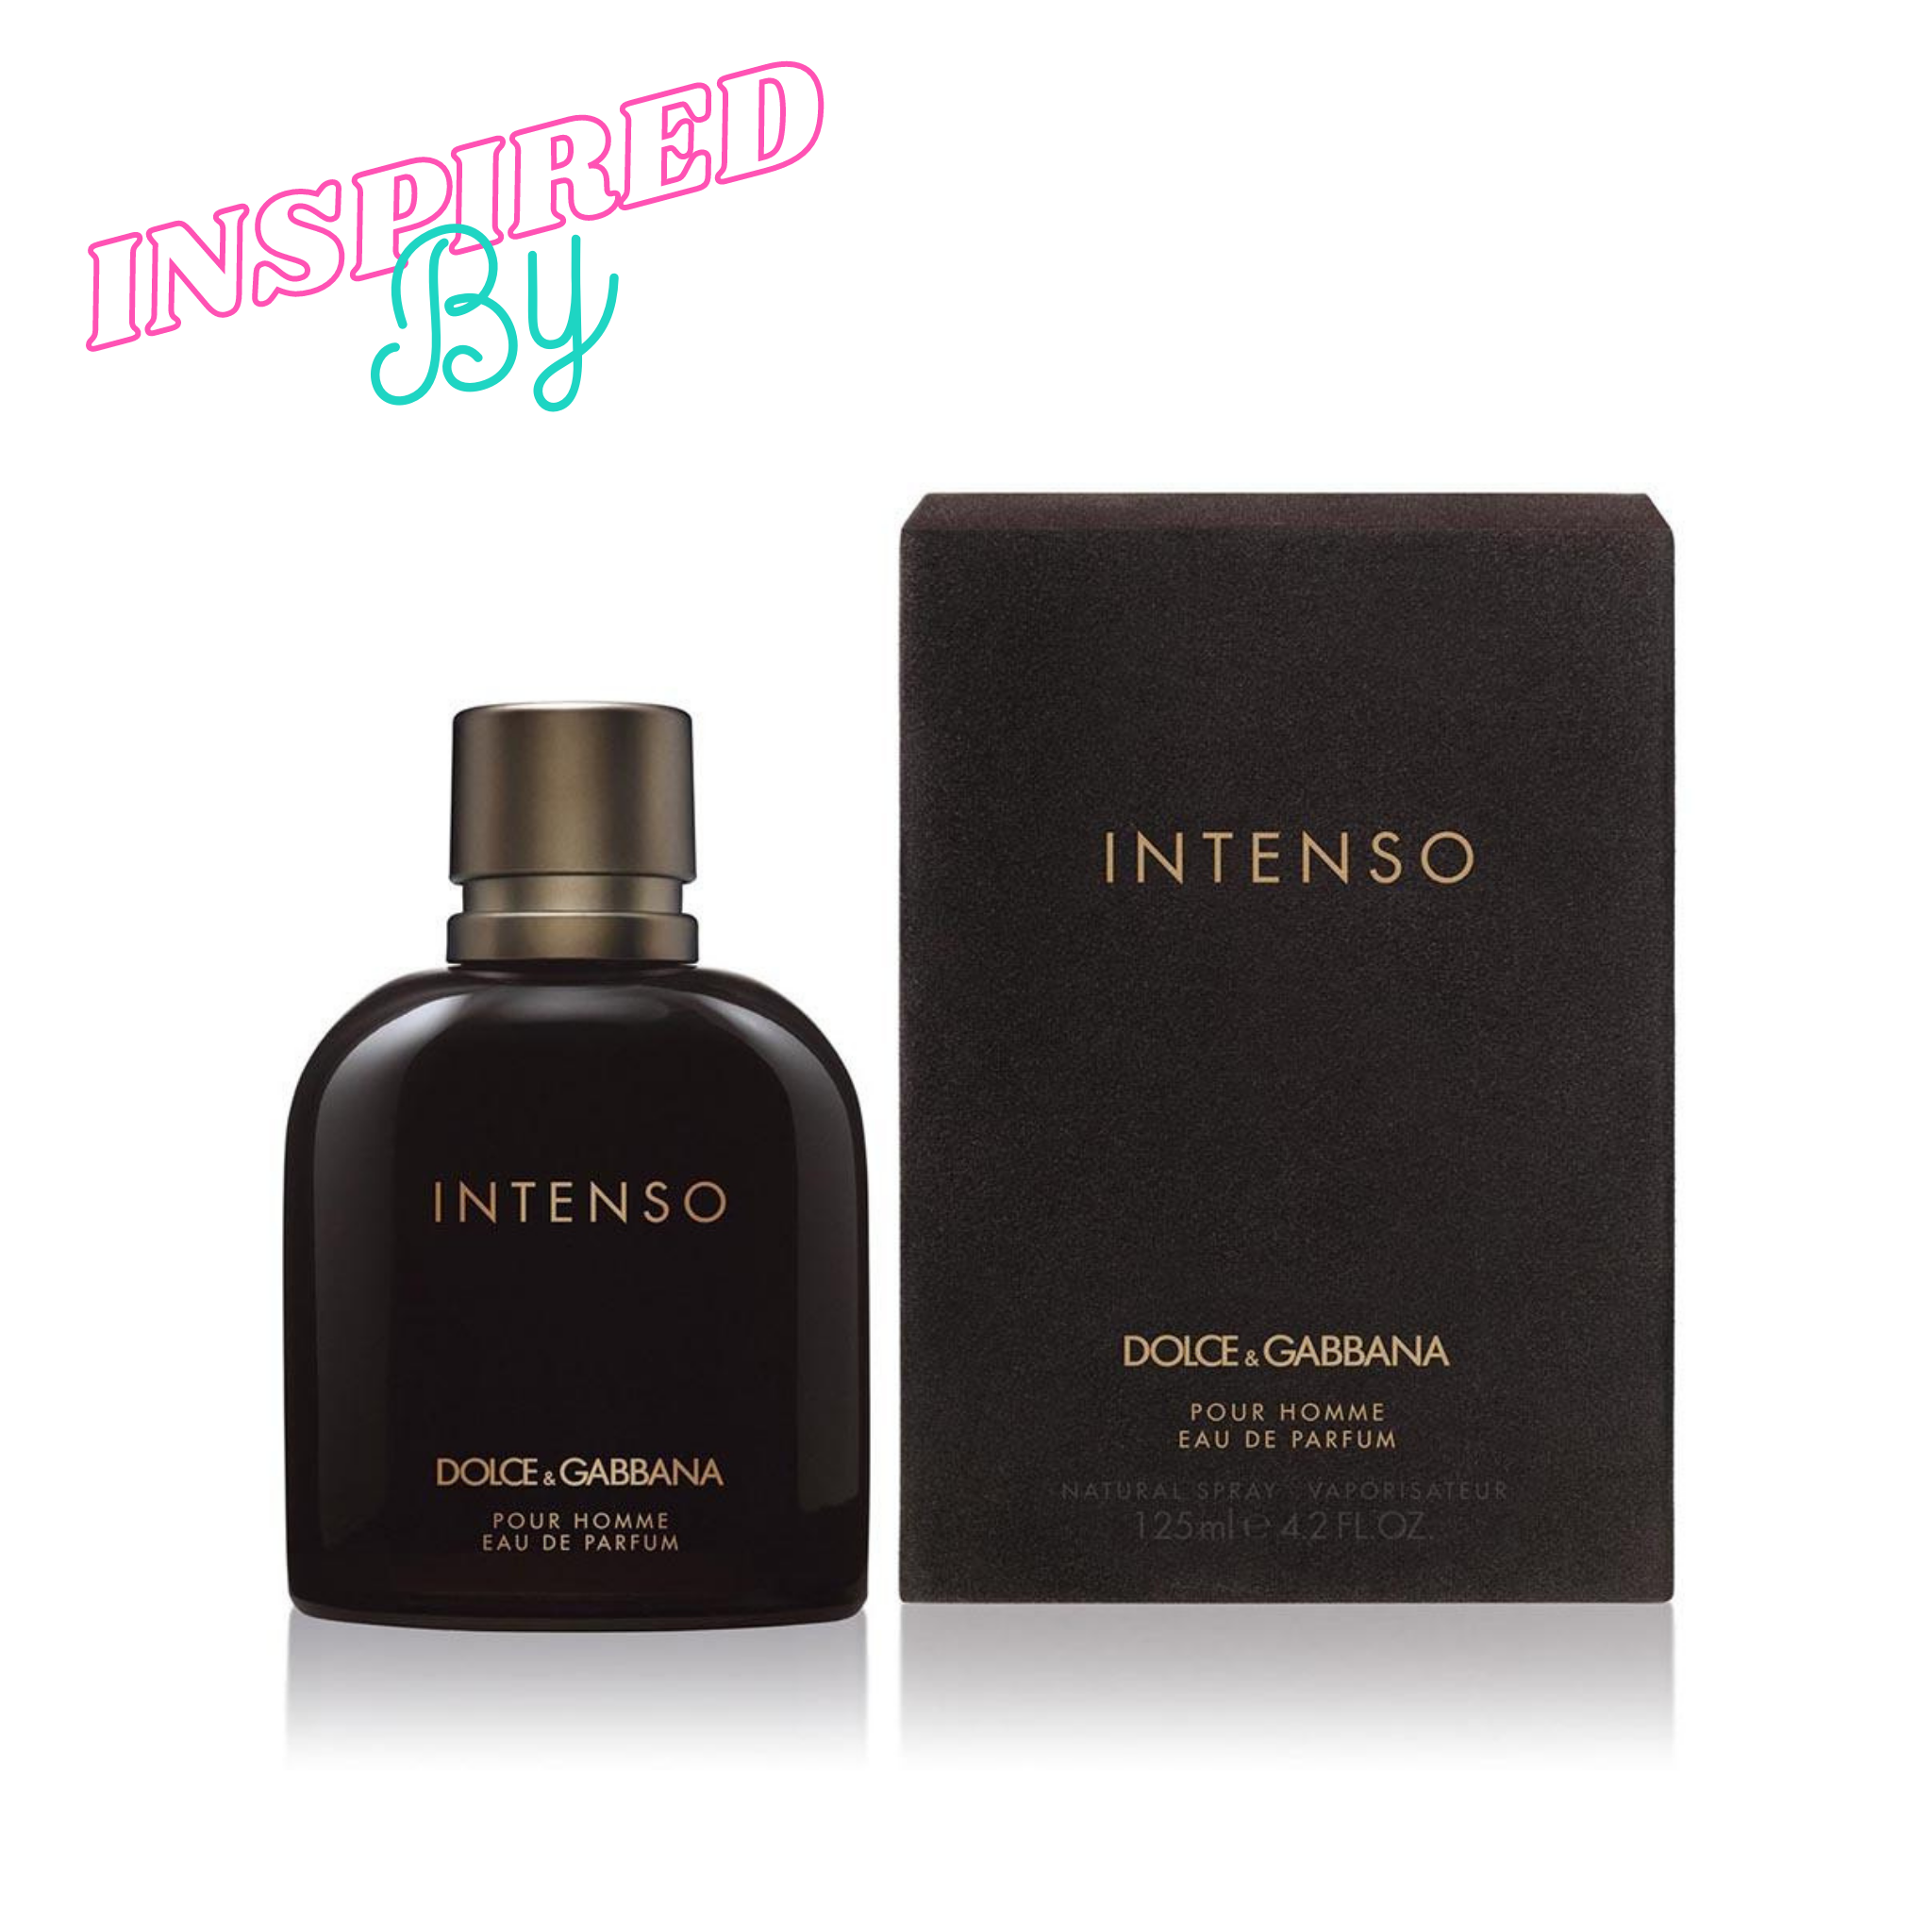 Inspired by D&G Intenso 100ml - Fragrance Deliver SA